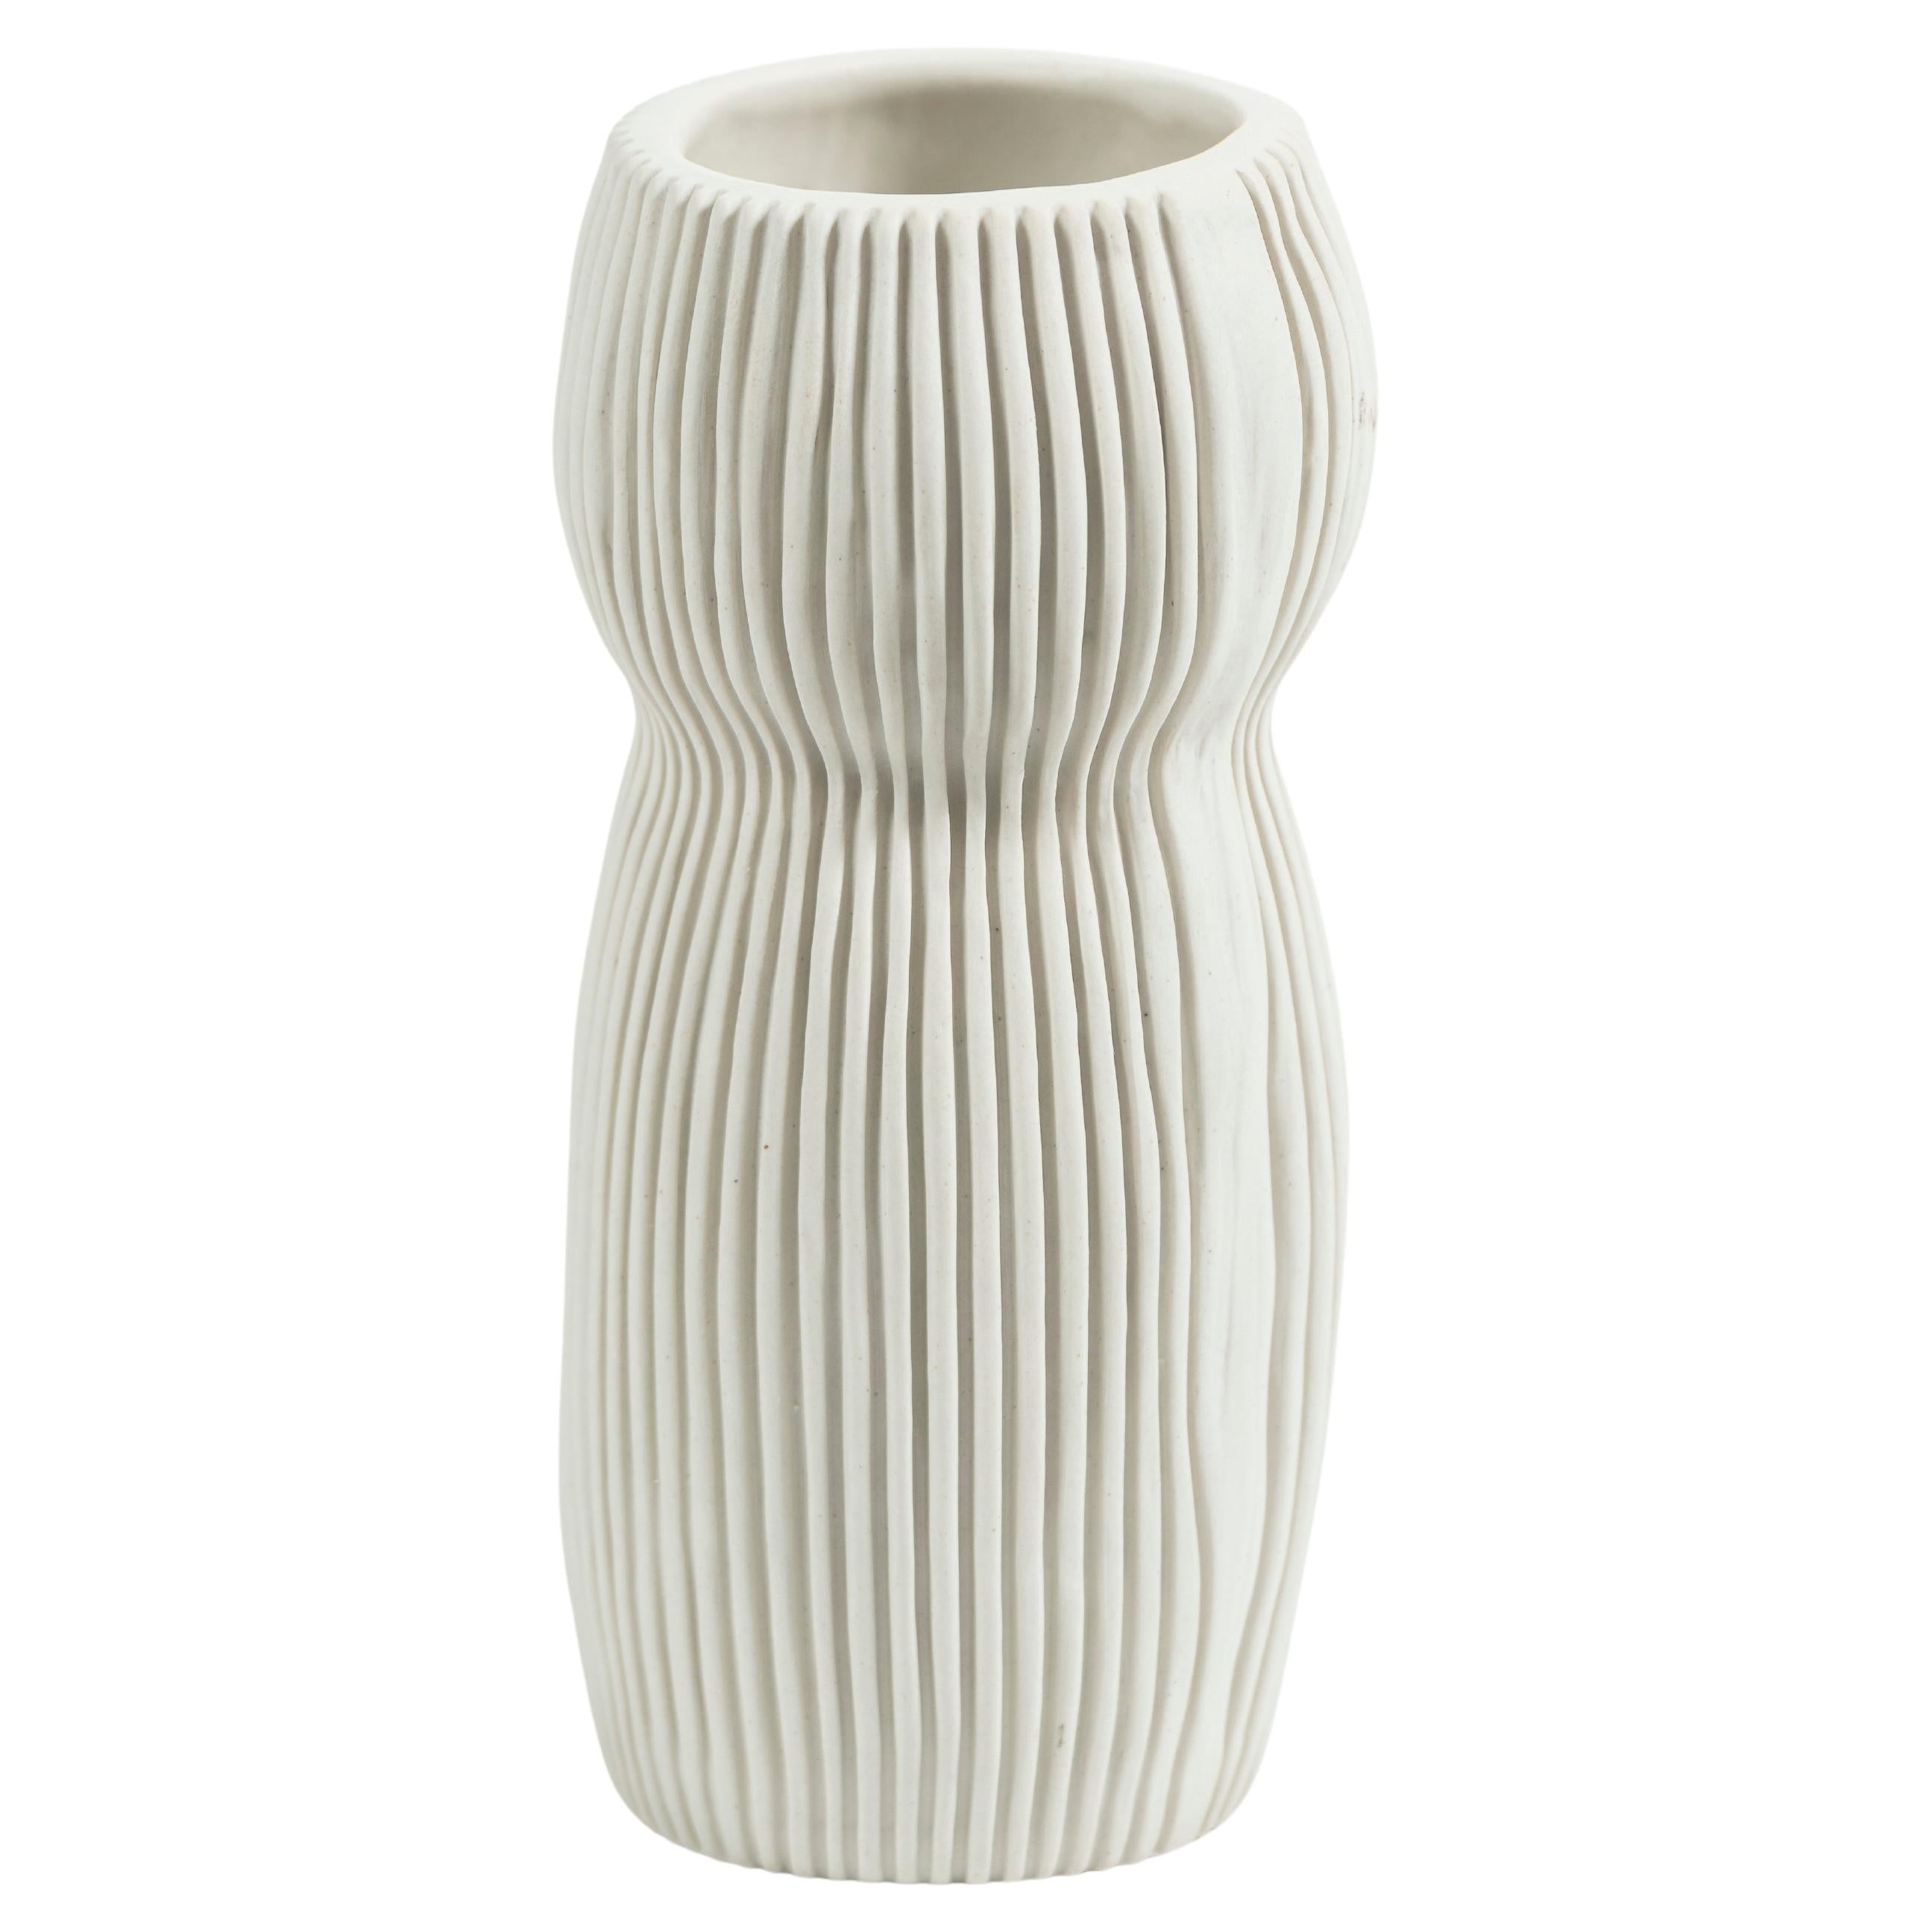 Hand Crafted Contemporary Ceramic Vase in Cream, signed For Sale